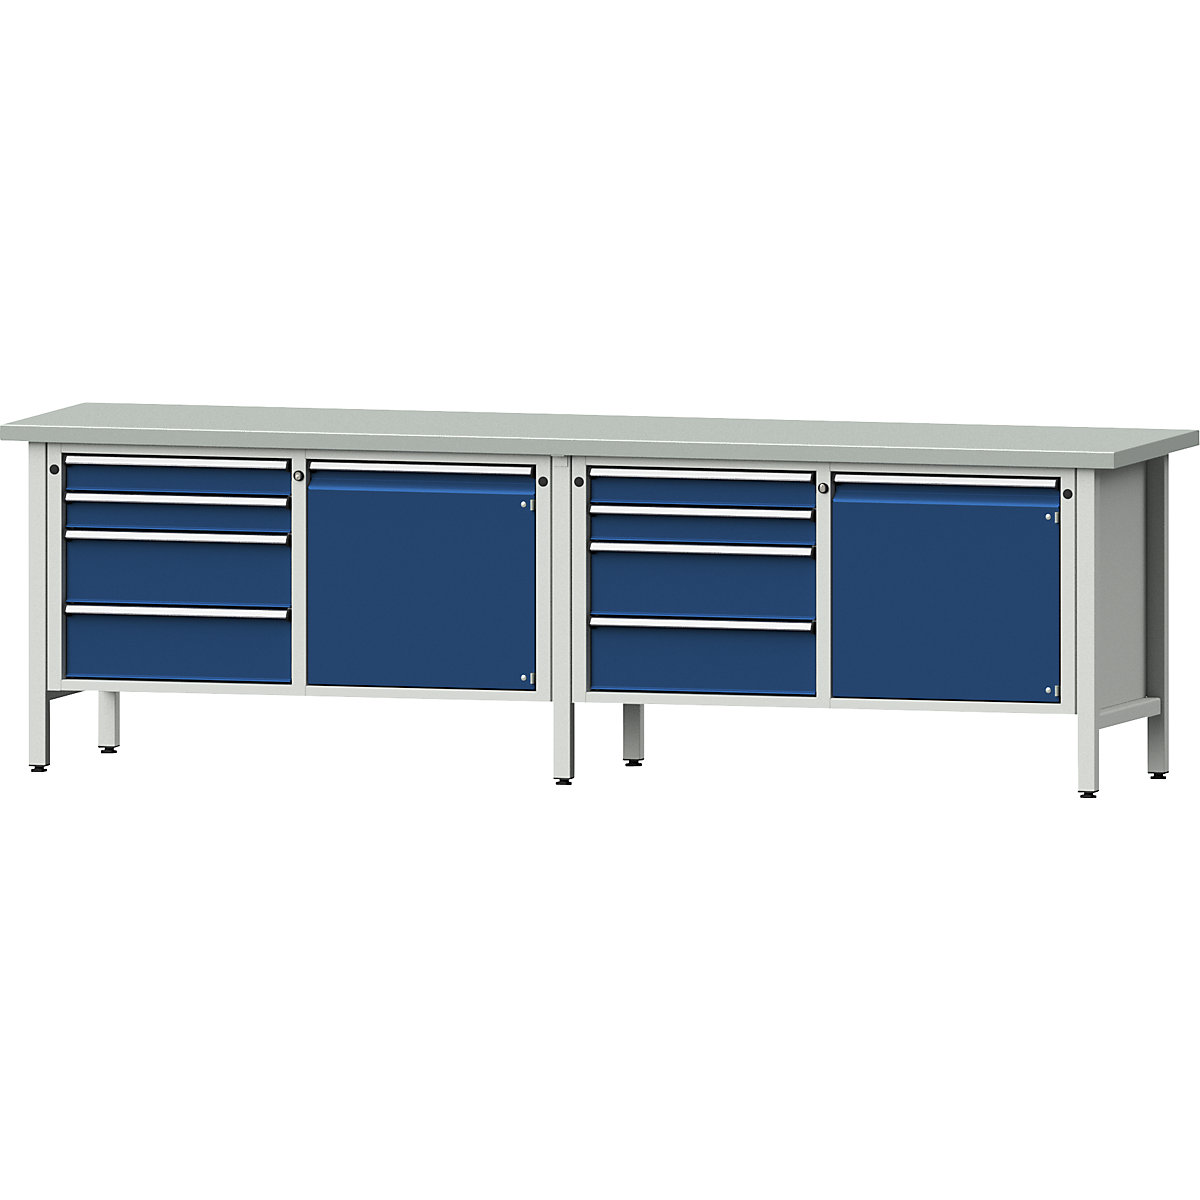 Workbench width 2800 mm, frame construction – ANKE, 2 doors, 8 drawers with partial extension, sheet steel covered worktop-9